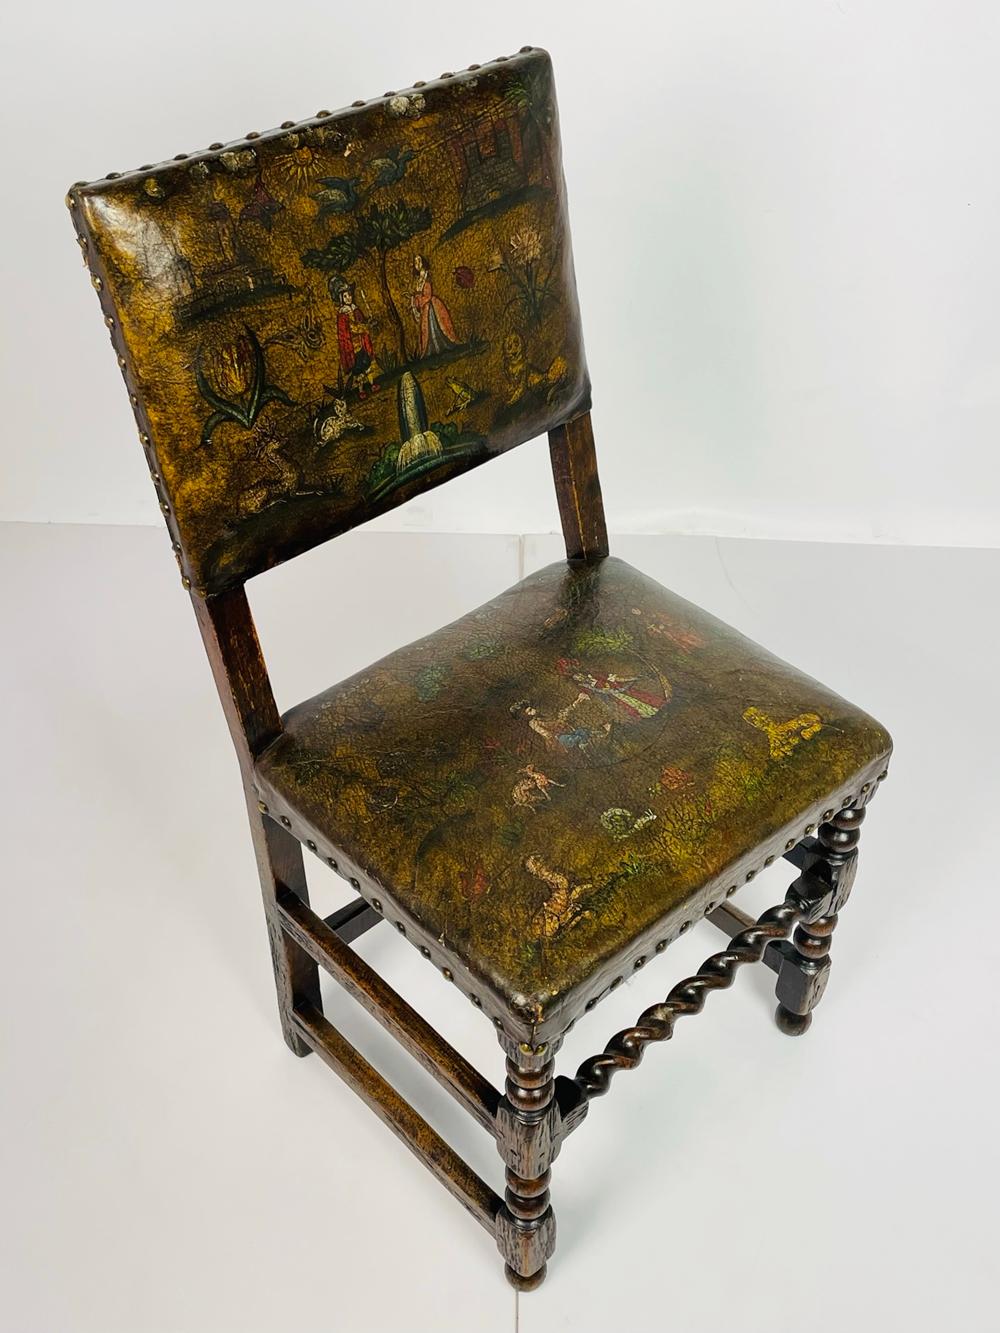 20th Century Antique Leather & Wood Chair With Painting on Seat & Backrest, Made in France